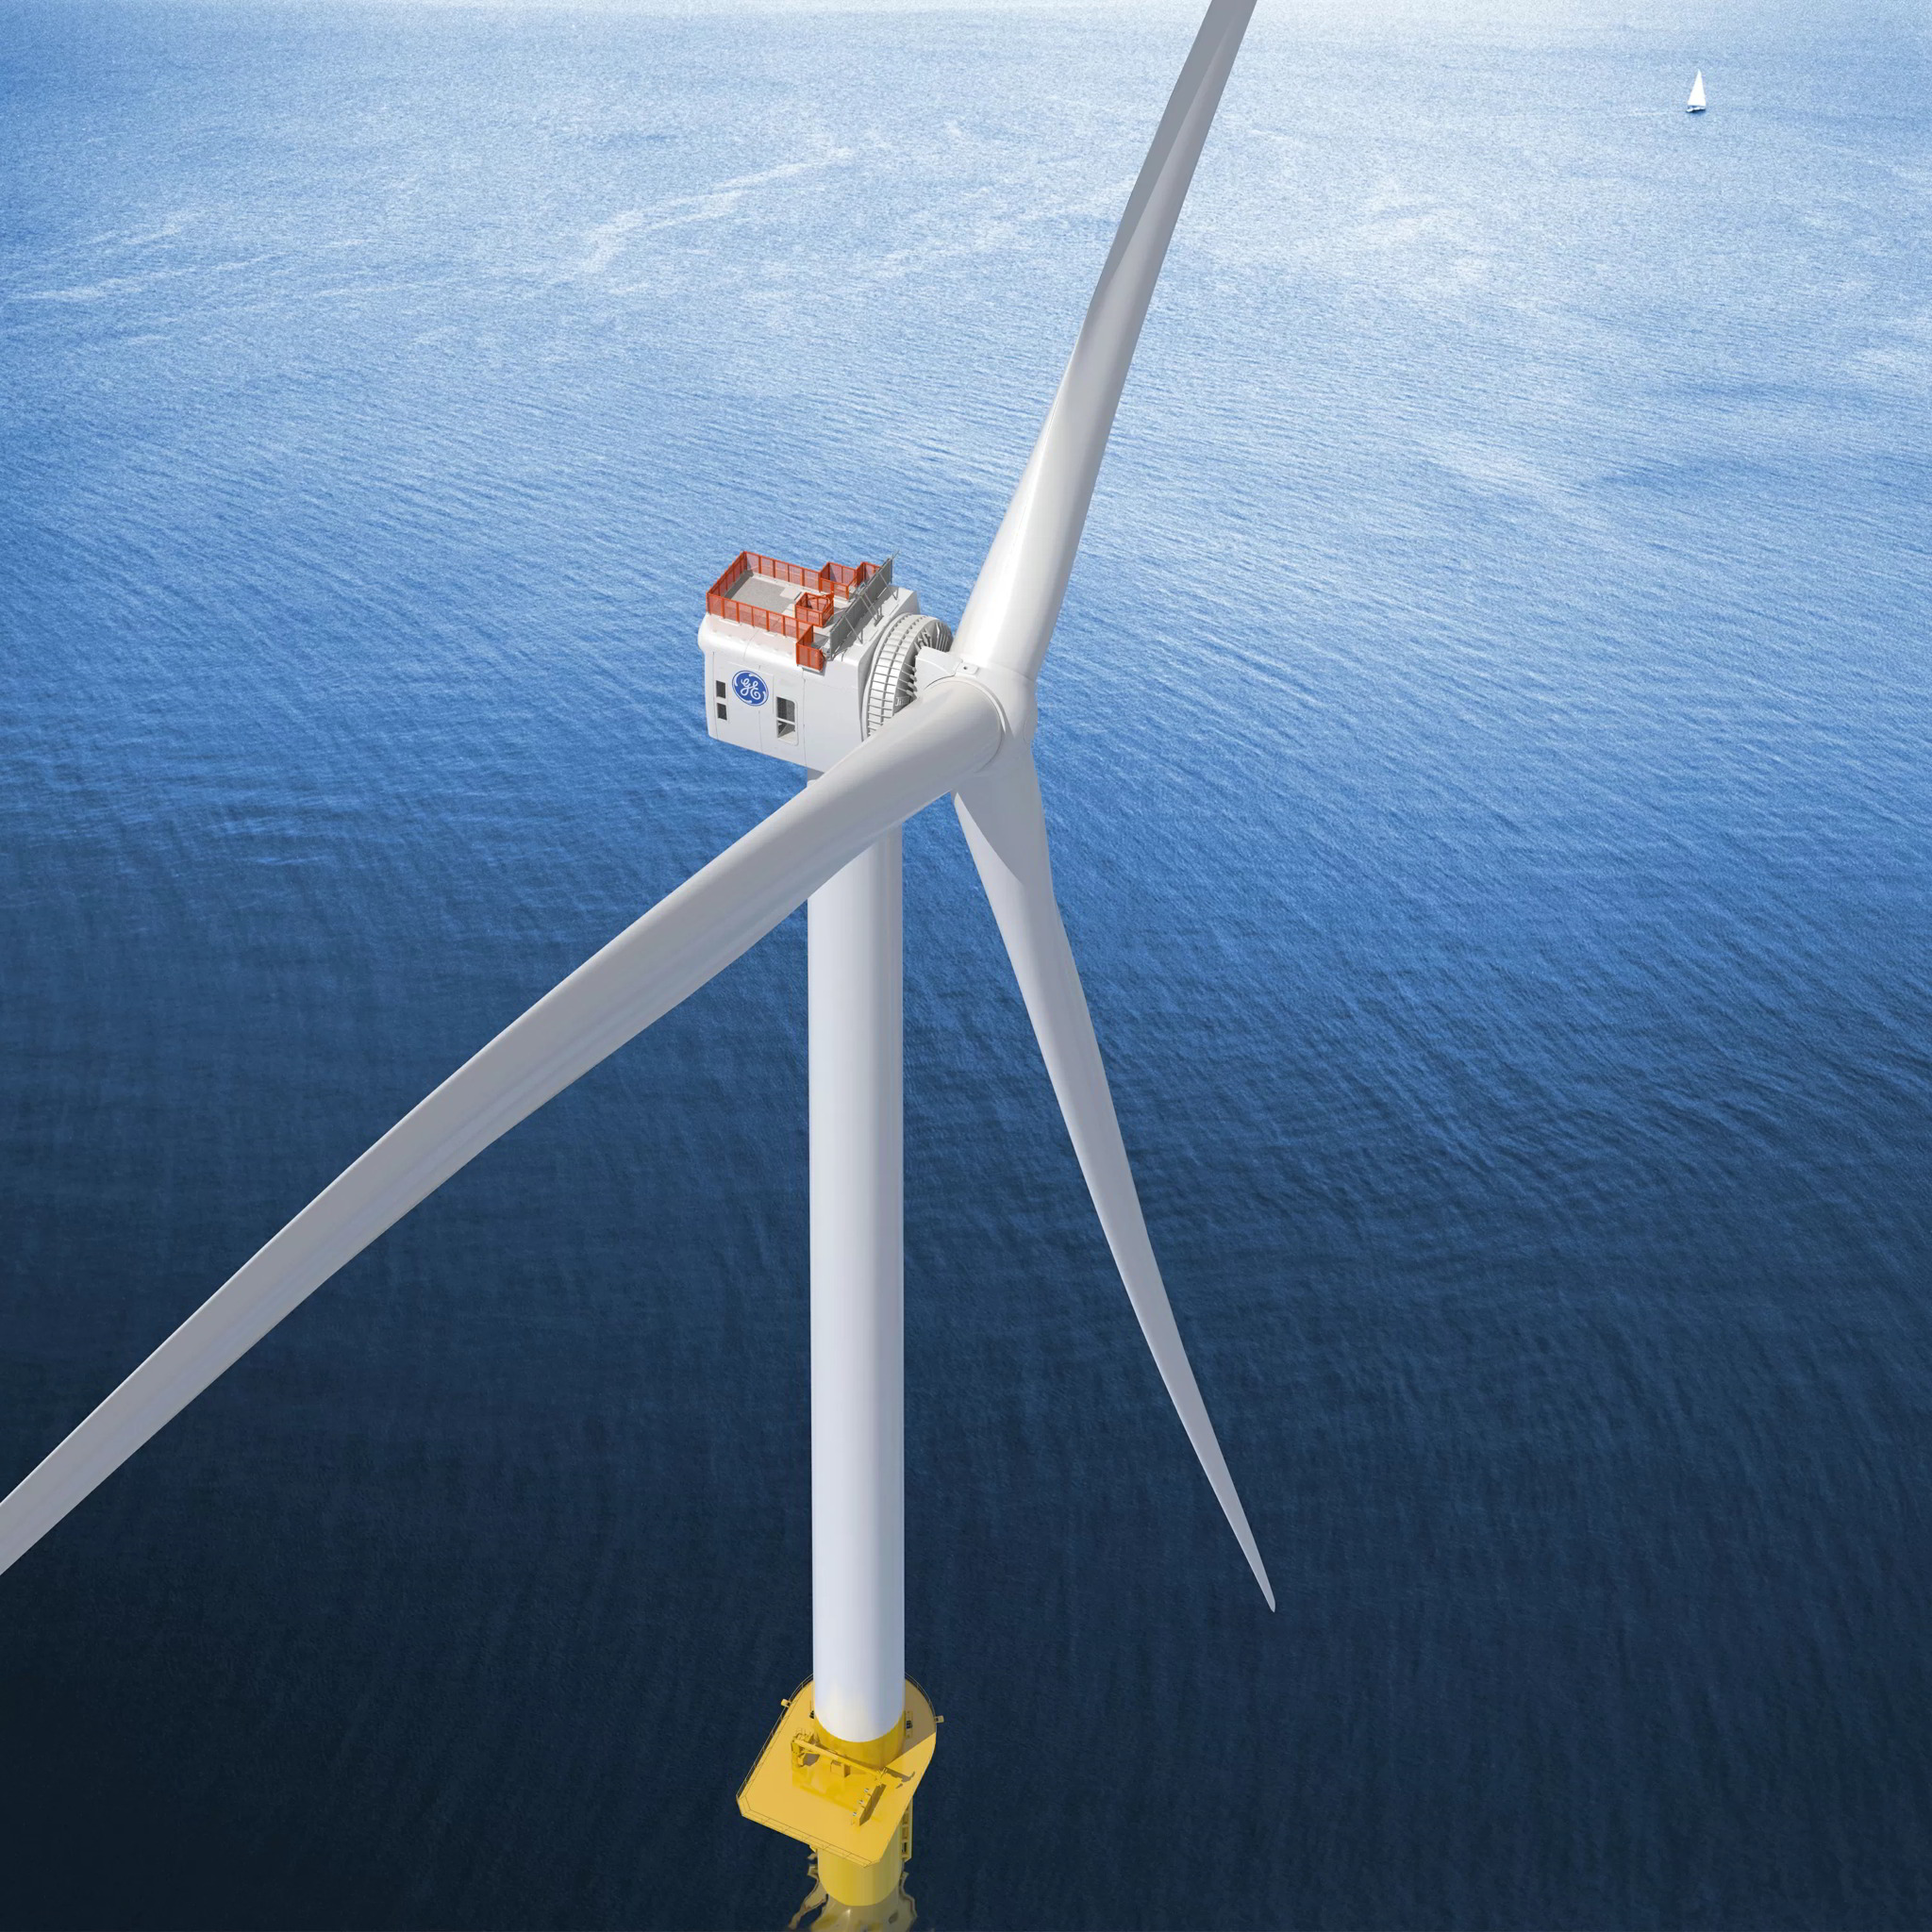 An aerial photo of a GE Haliade offshore wind turbine